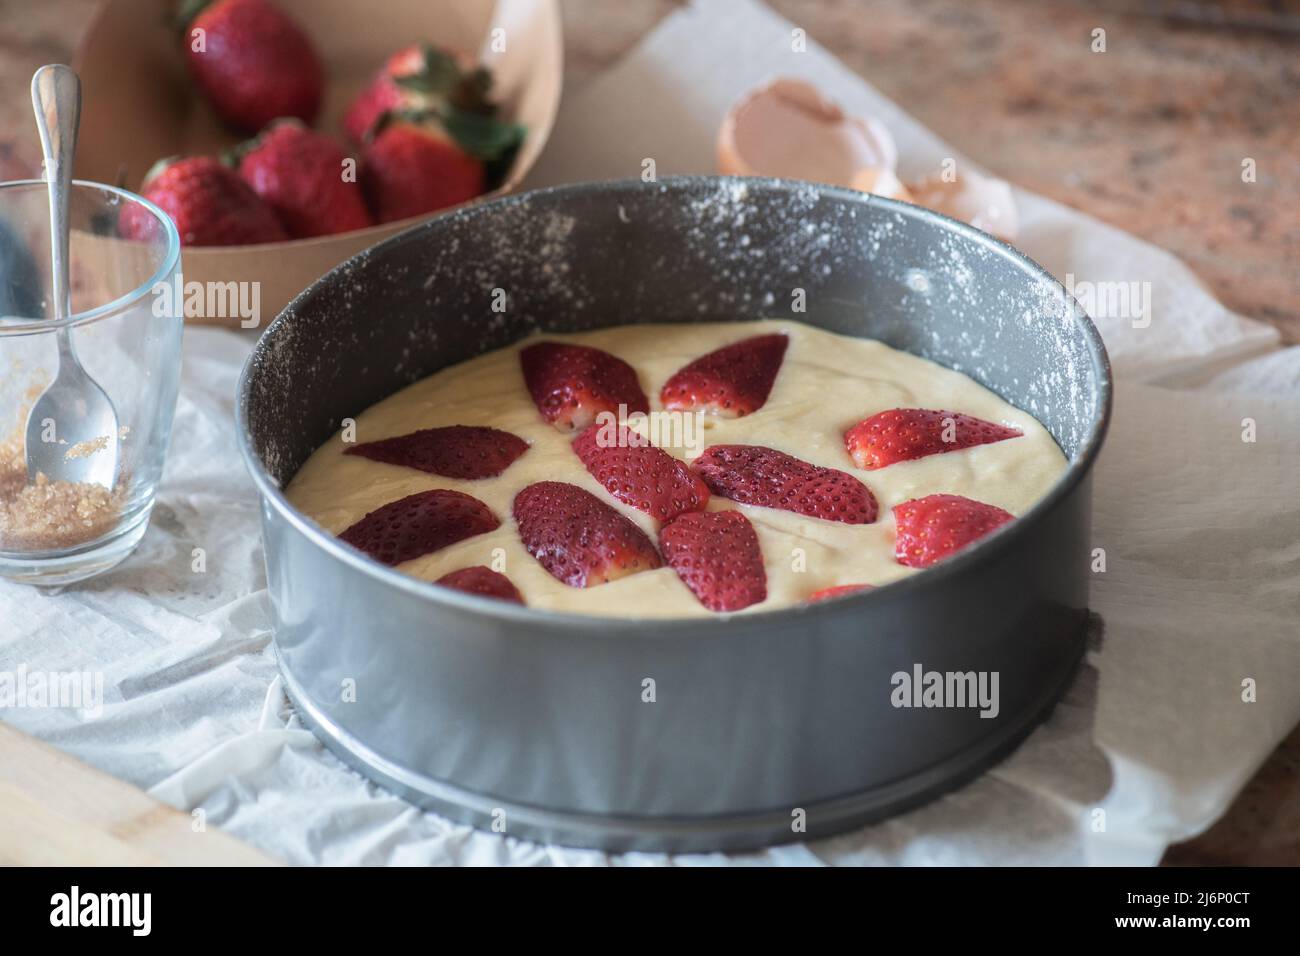 Homemade summer strawberry sponge cake in a baking form ready to bake. Stock Photo